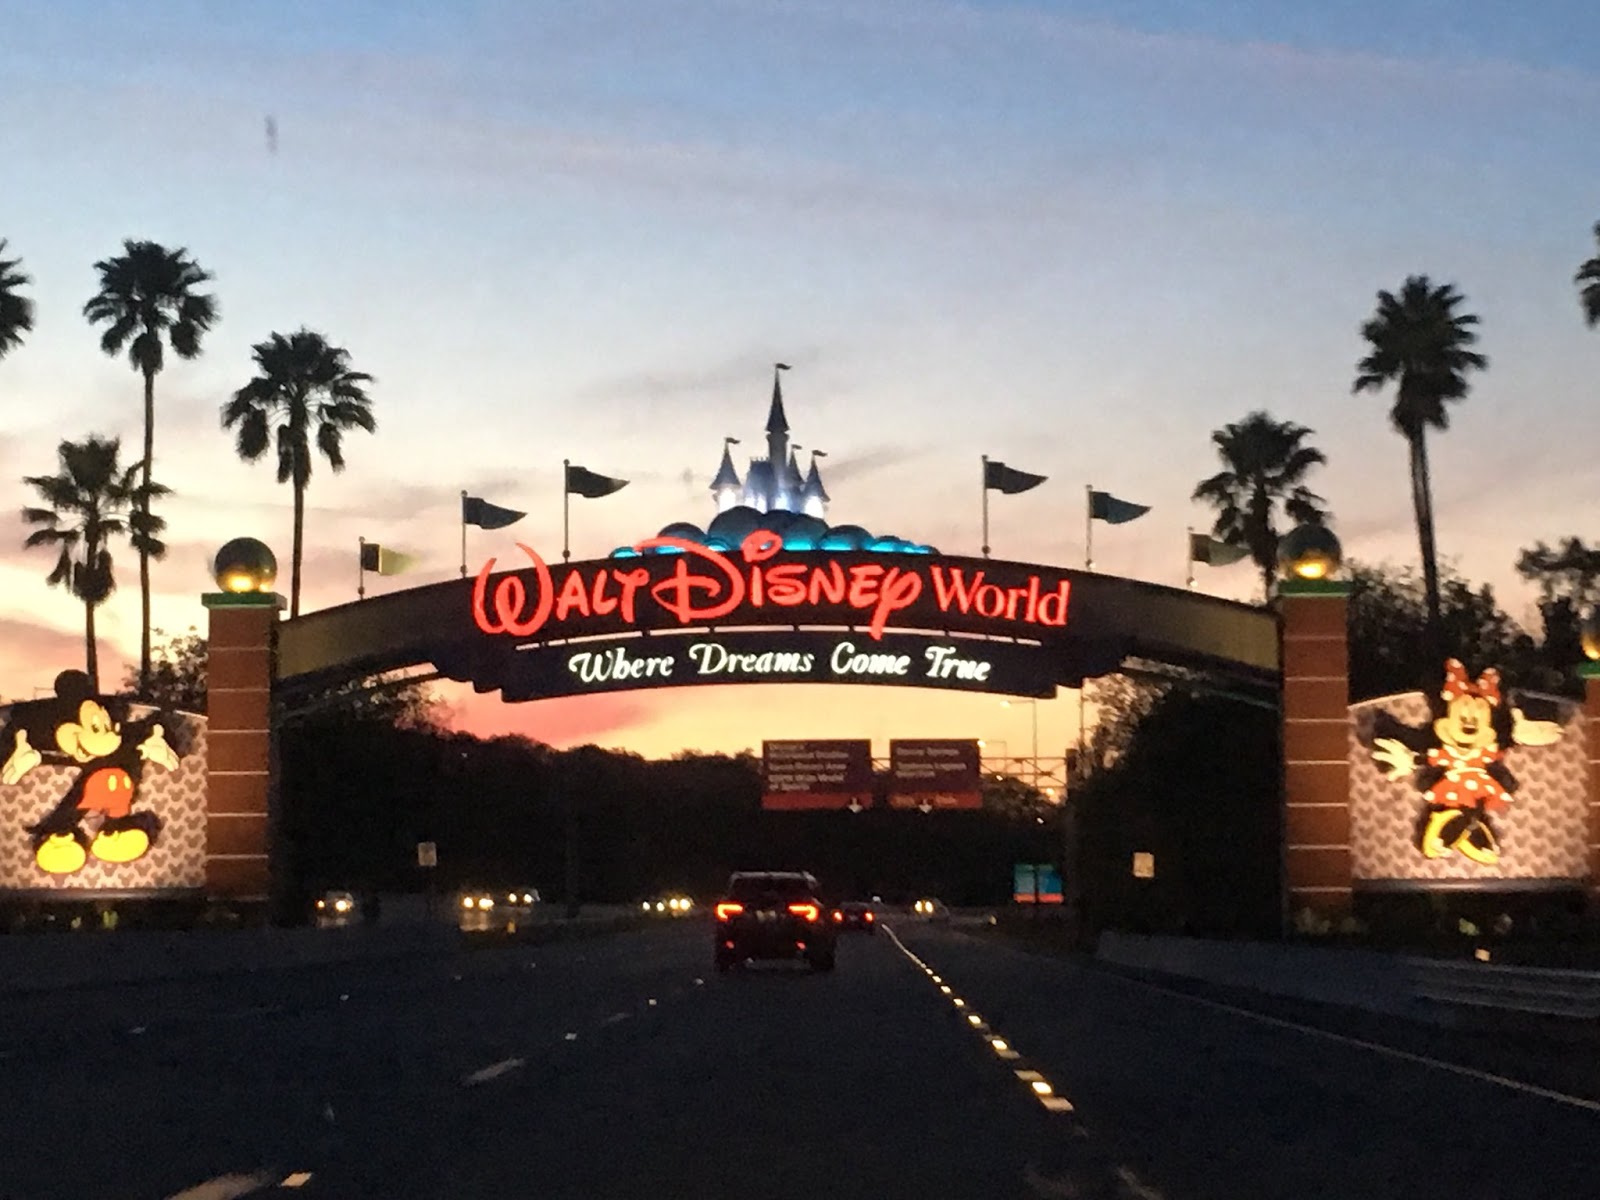 Walt Disney World Answers Questions About Tickets, Annual Passes